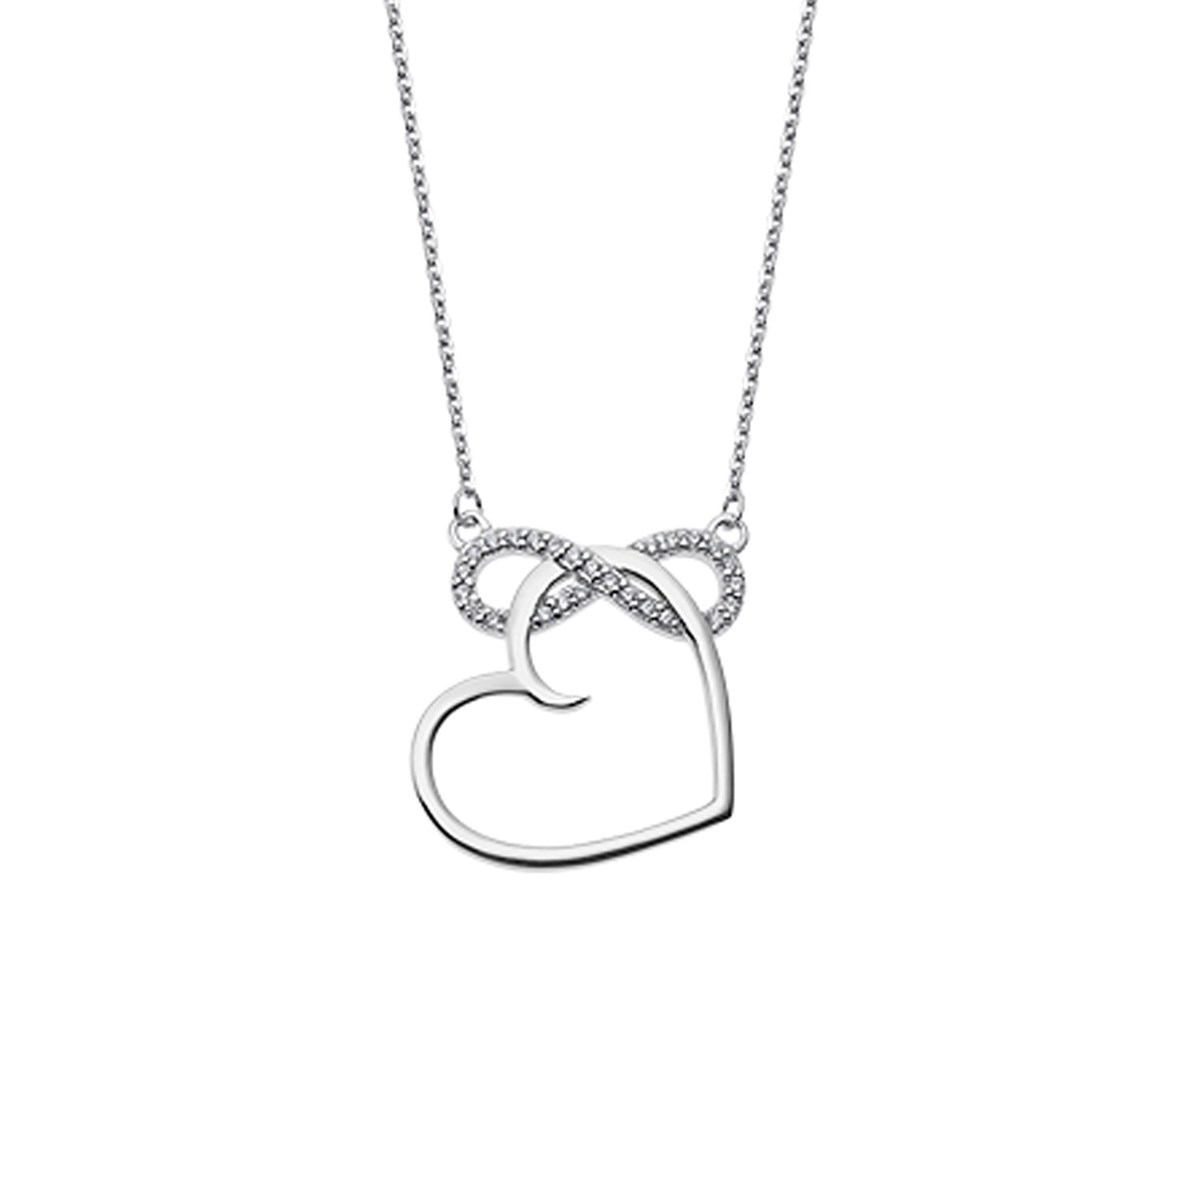 Collier double Lotus Silver Collection Moments
Coeur Infini